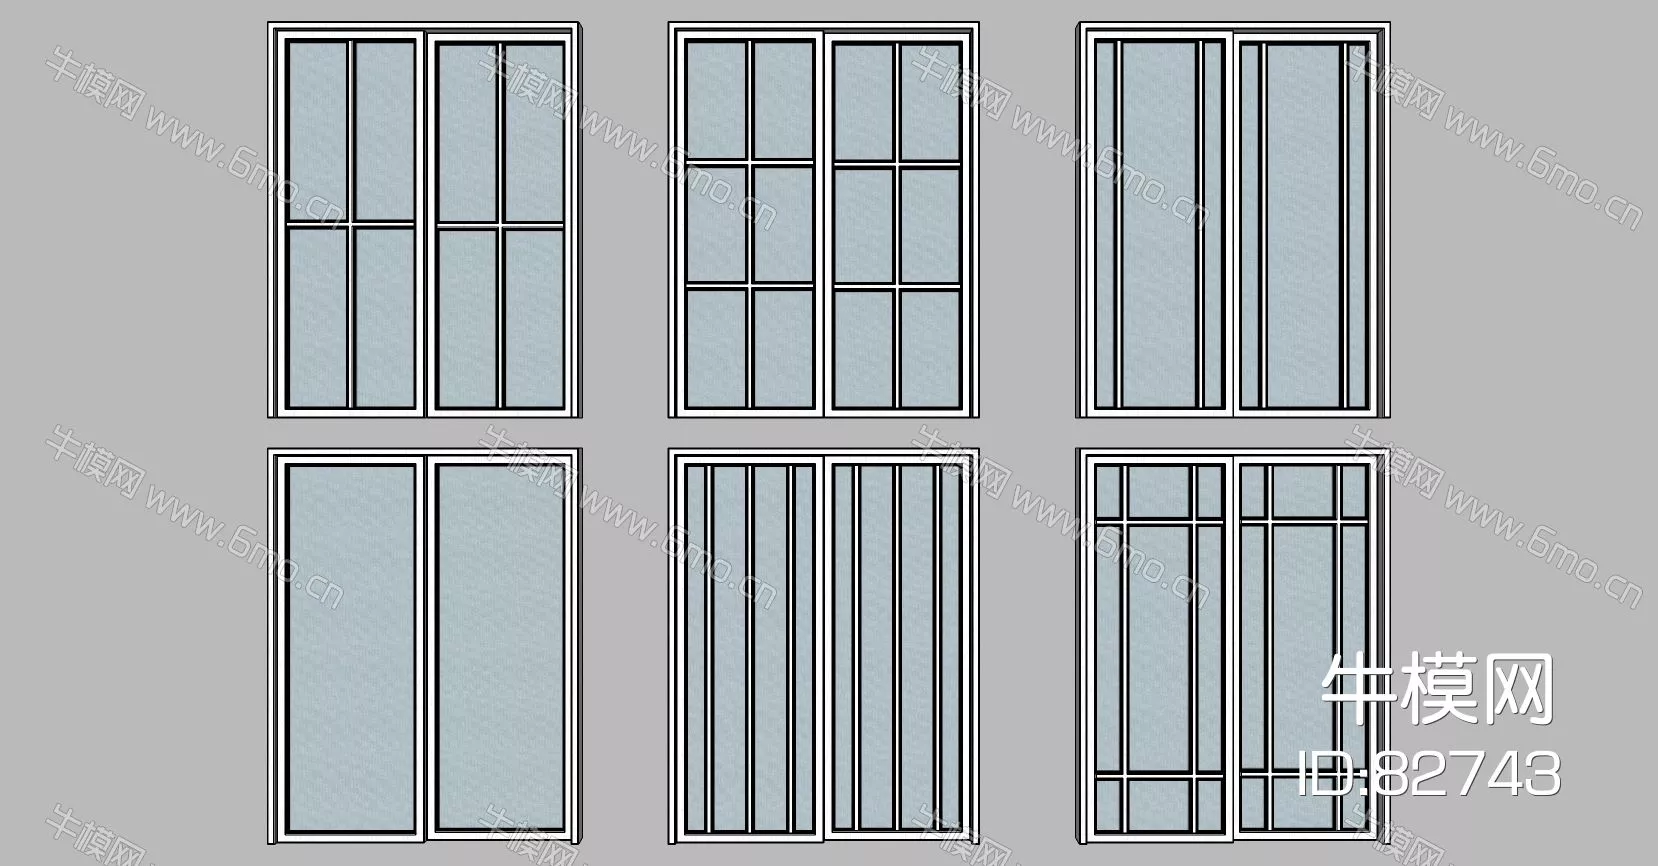 CHINESE DOOR AND WINDOWS - SKETCHUP 3D MODEL - ENSCAPE - 82743